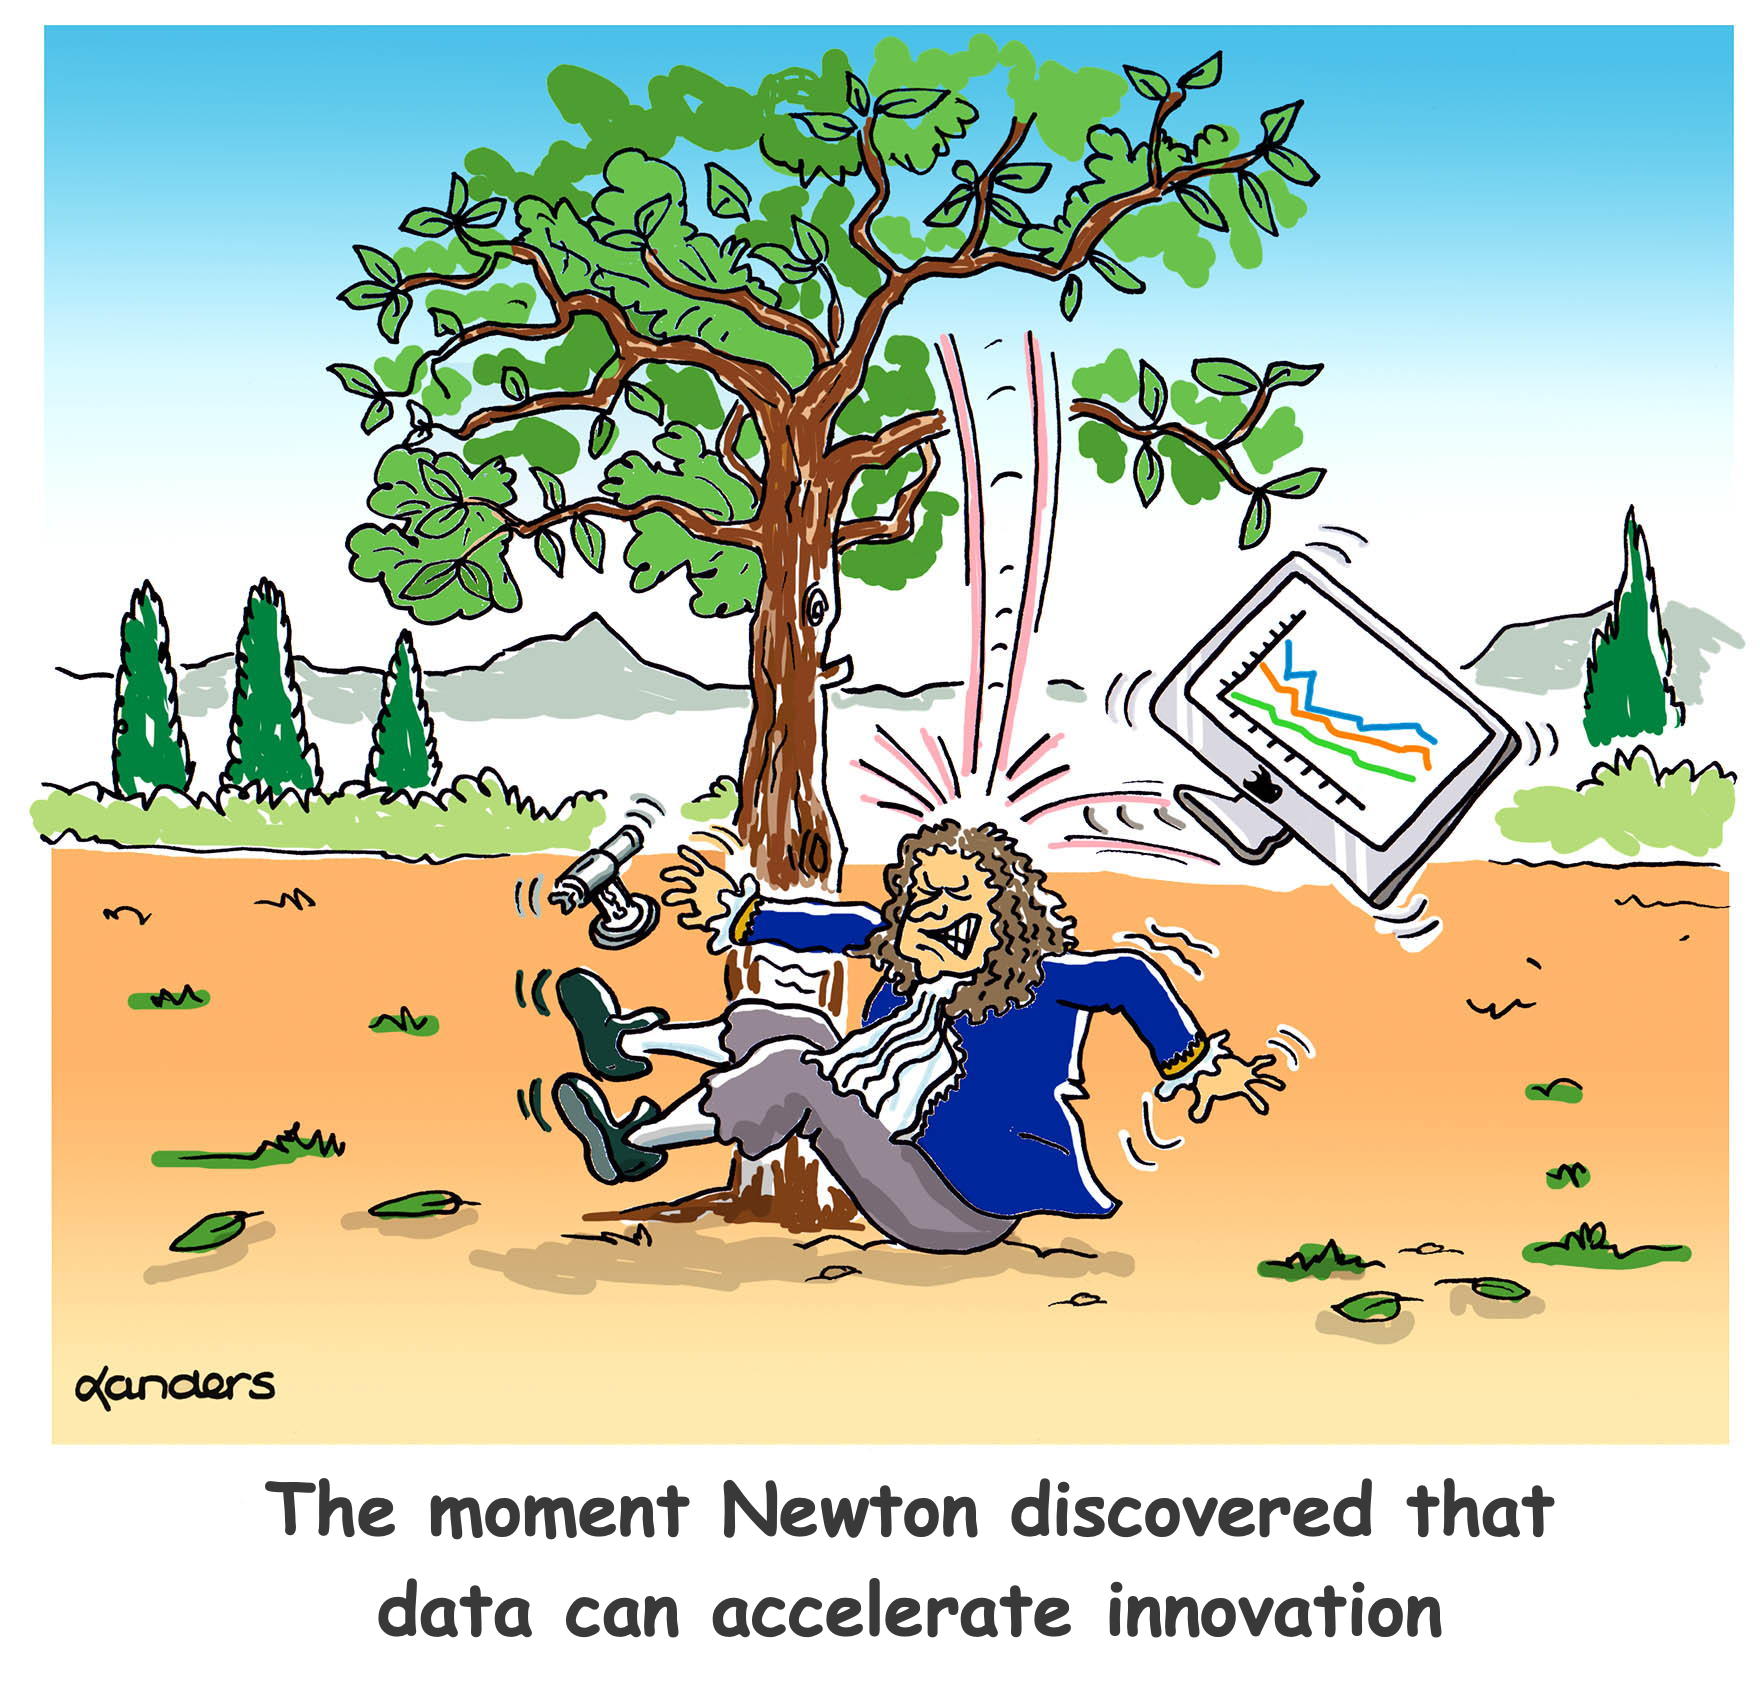 Cartoon with Isaac Newton apple tree fable (but apple is a computer)